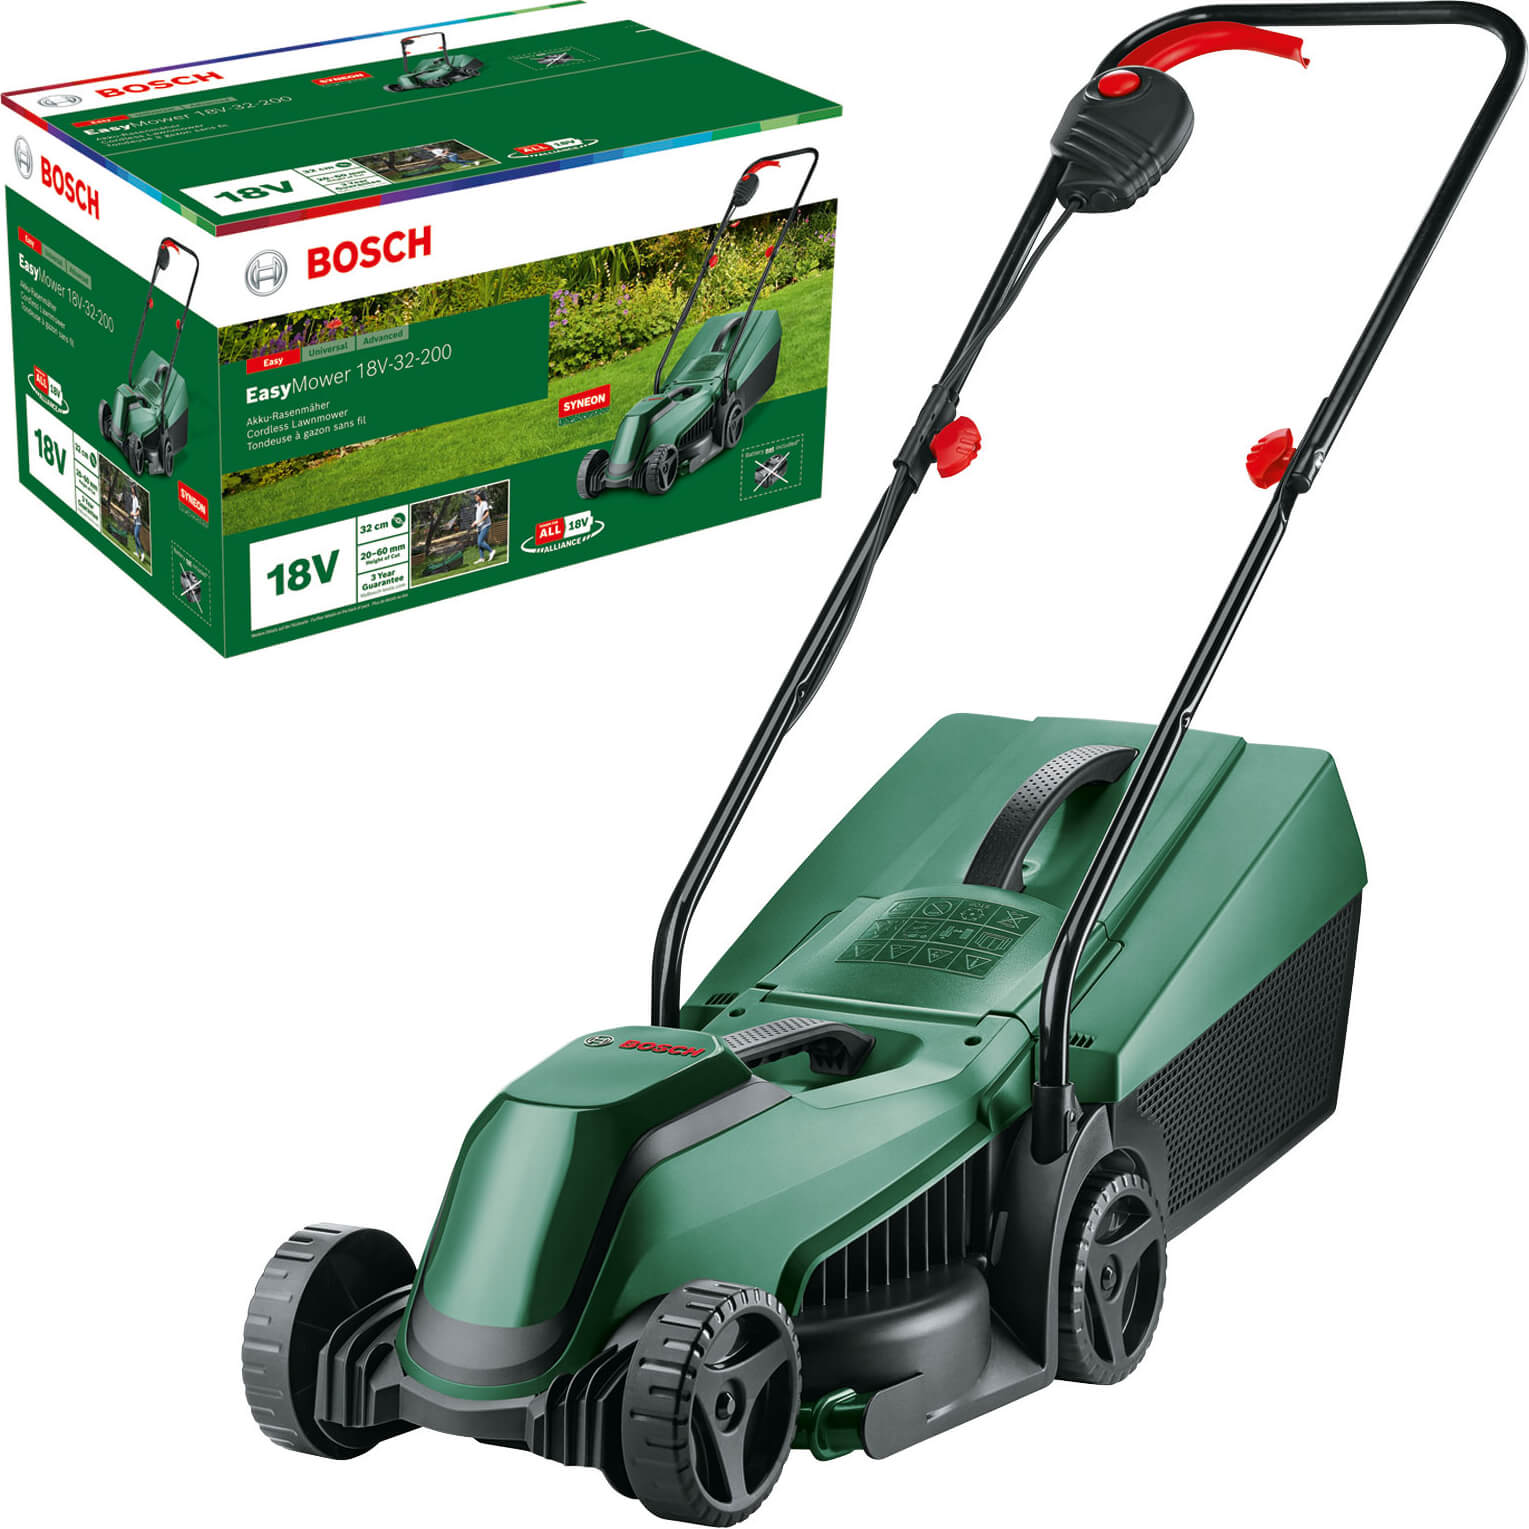 Bosch EASYMOWER 18V-32 P4A 18v Cordless Rotary Lawnmower 320mm No Batteries No Charger